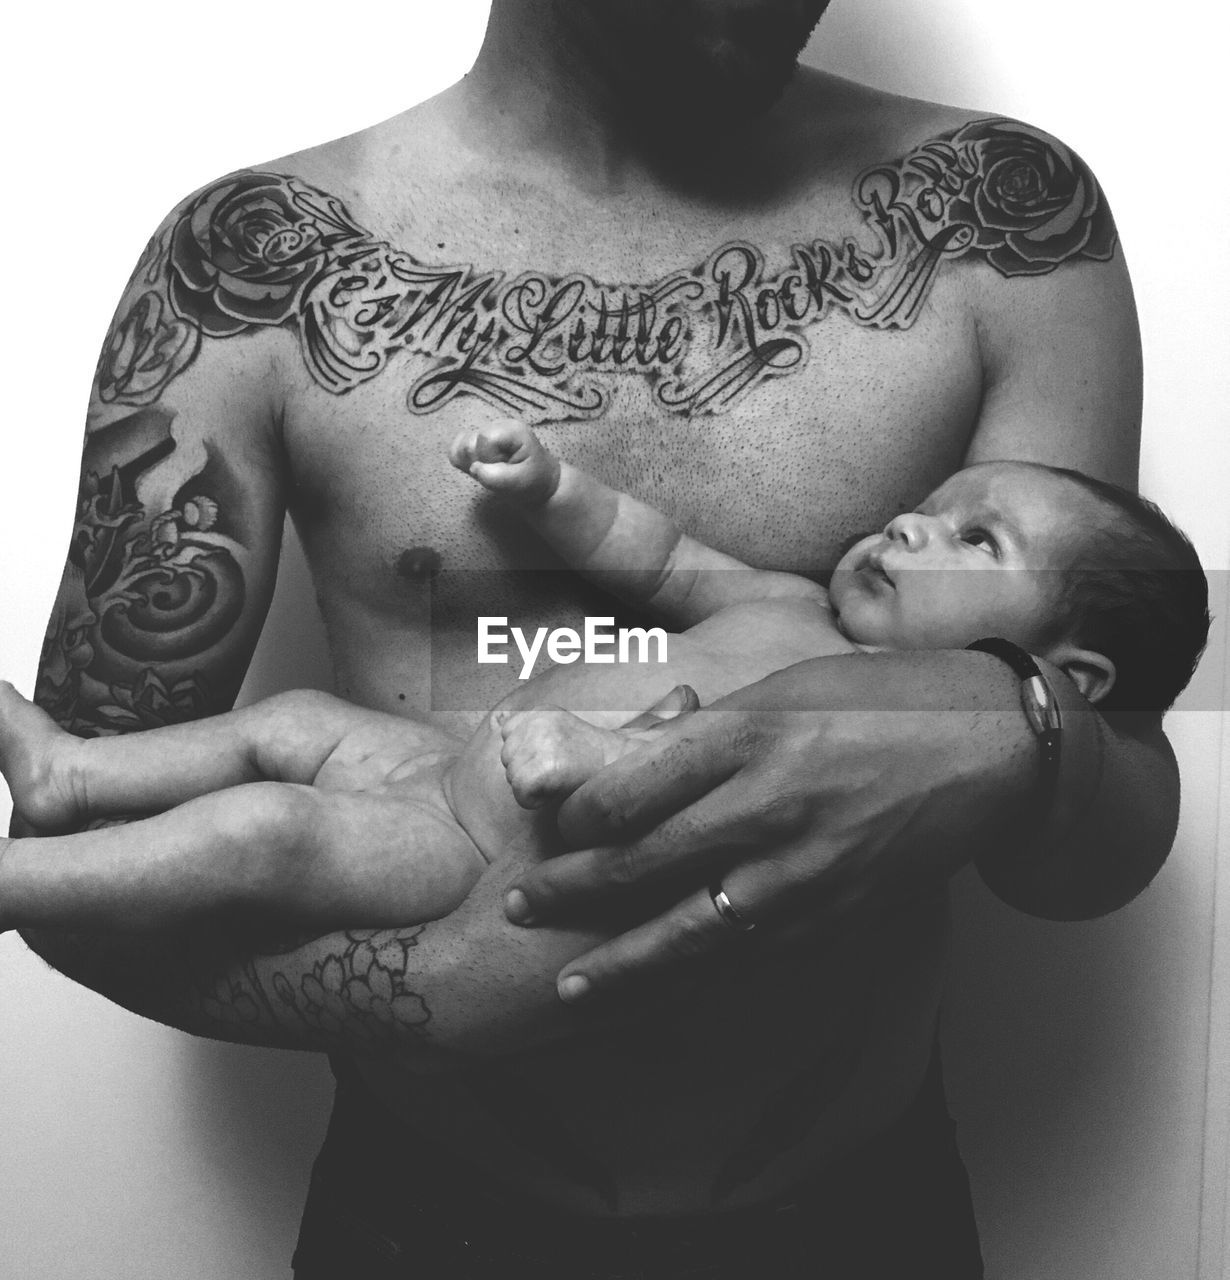 Mid section of shirtless tattooed man holding baby against wall